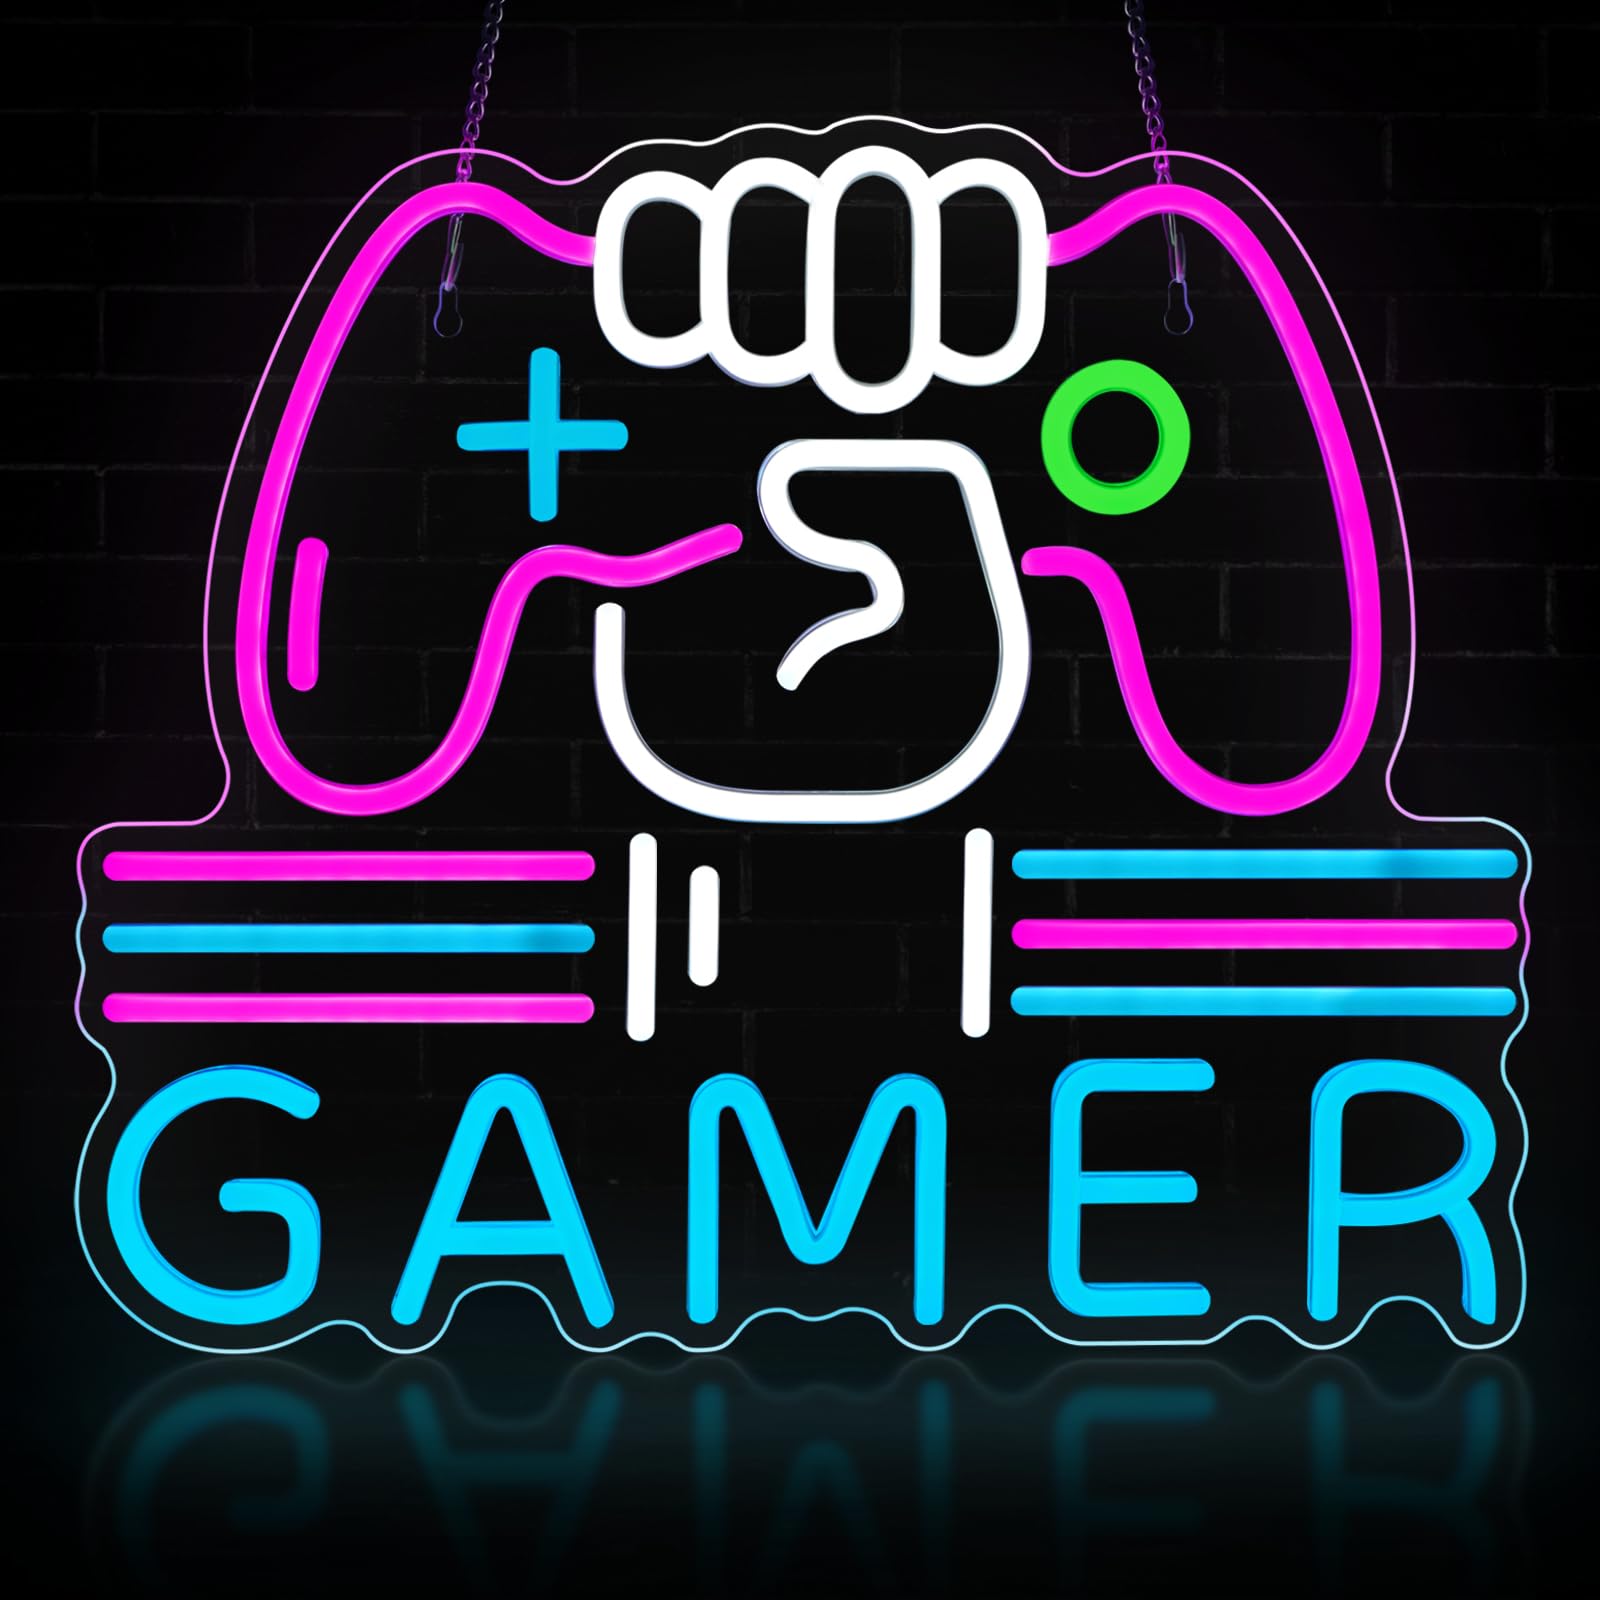 Gamer Neon Sign, Bright and Dimmable Large Colorful Neon Light for Gaming Video Room Bedroom Wall Decor, USB Powered LED Game Room Night Lights Gift for Boys Teen Kids Gamers(15.4X12.6") (Gamer) - amzGamess